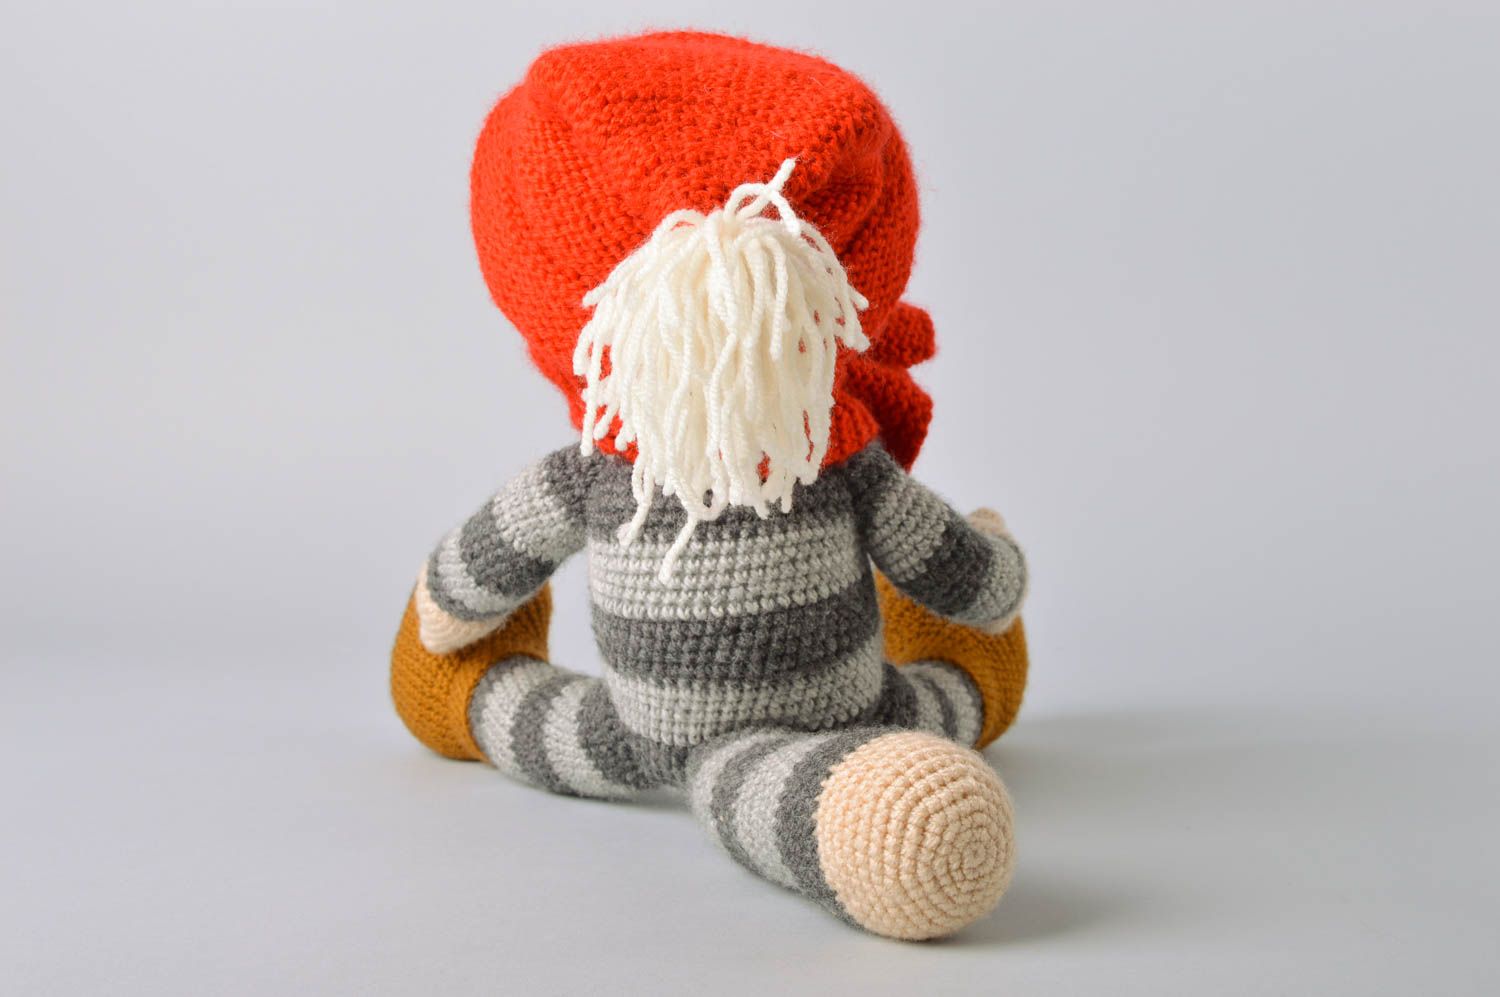 Handmade designer crochet toy striped gray cat in red hat and scarf photo 5